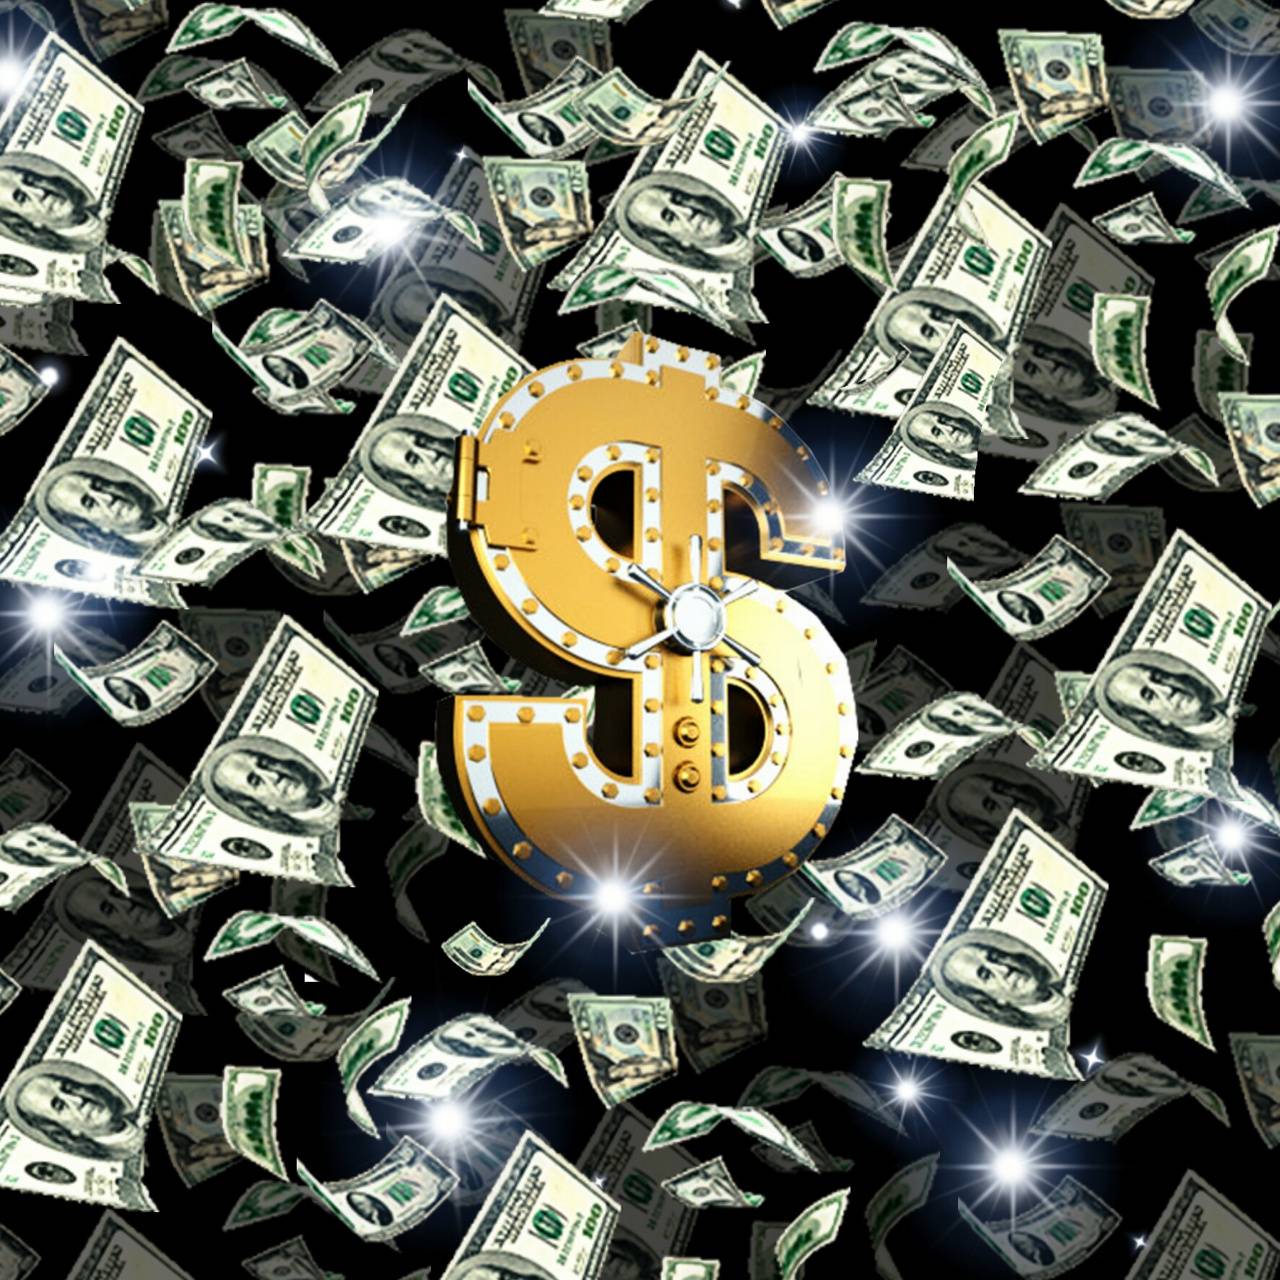 money sign backgrounds